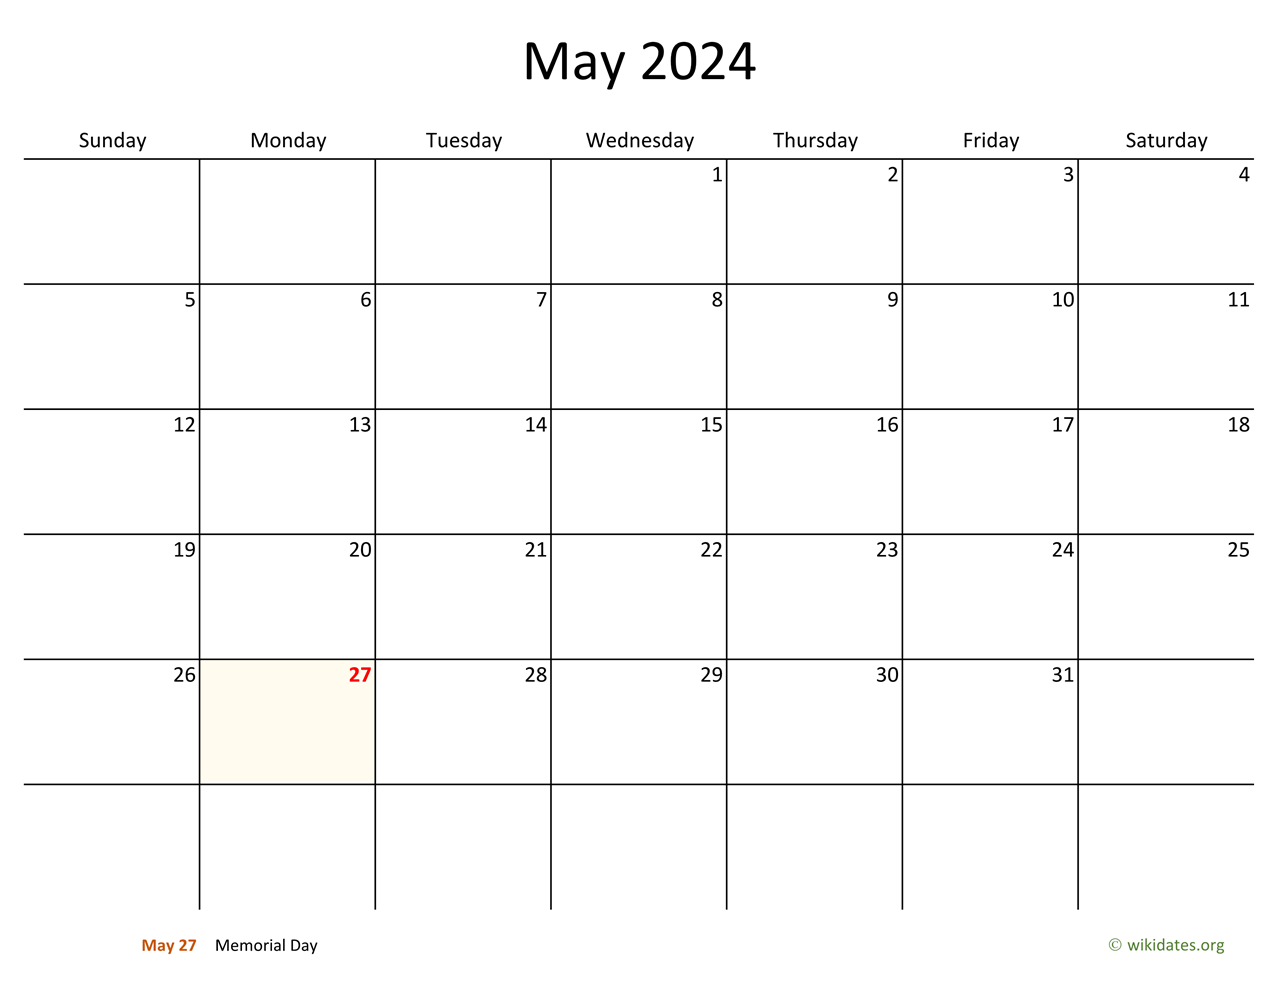 May 2024 Calendar with Bigger boxes | WikiDates.org